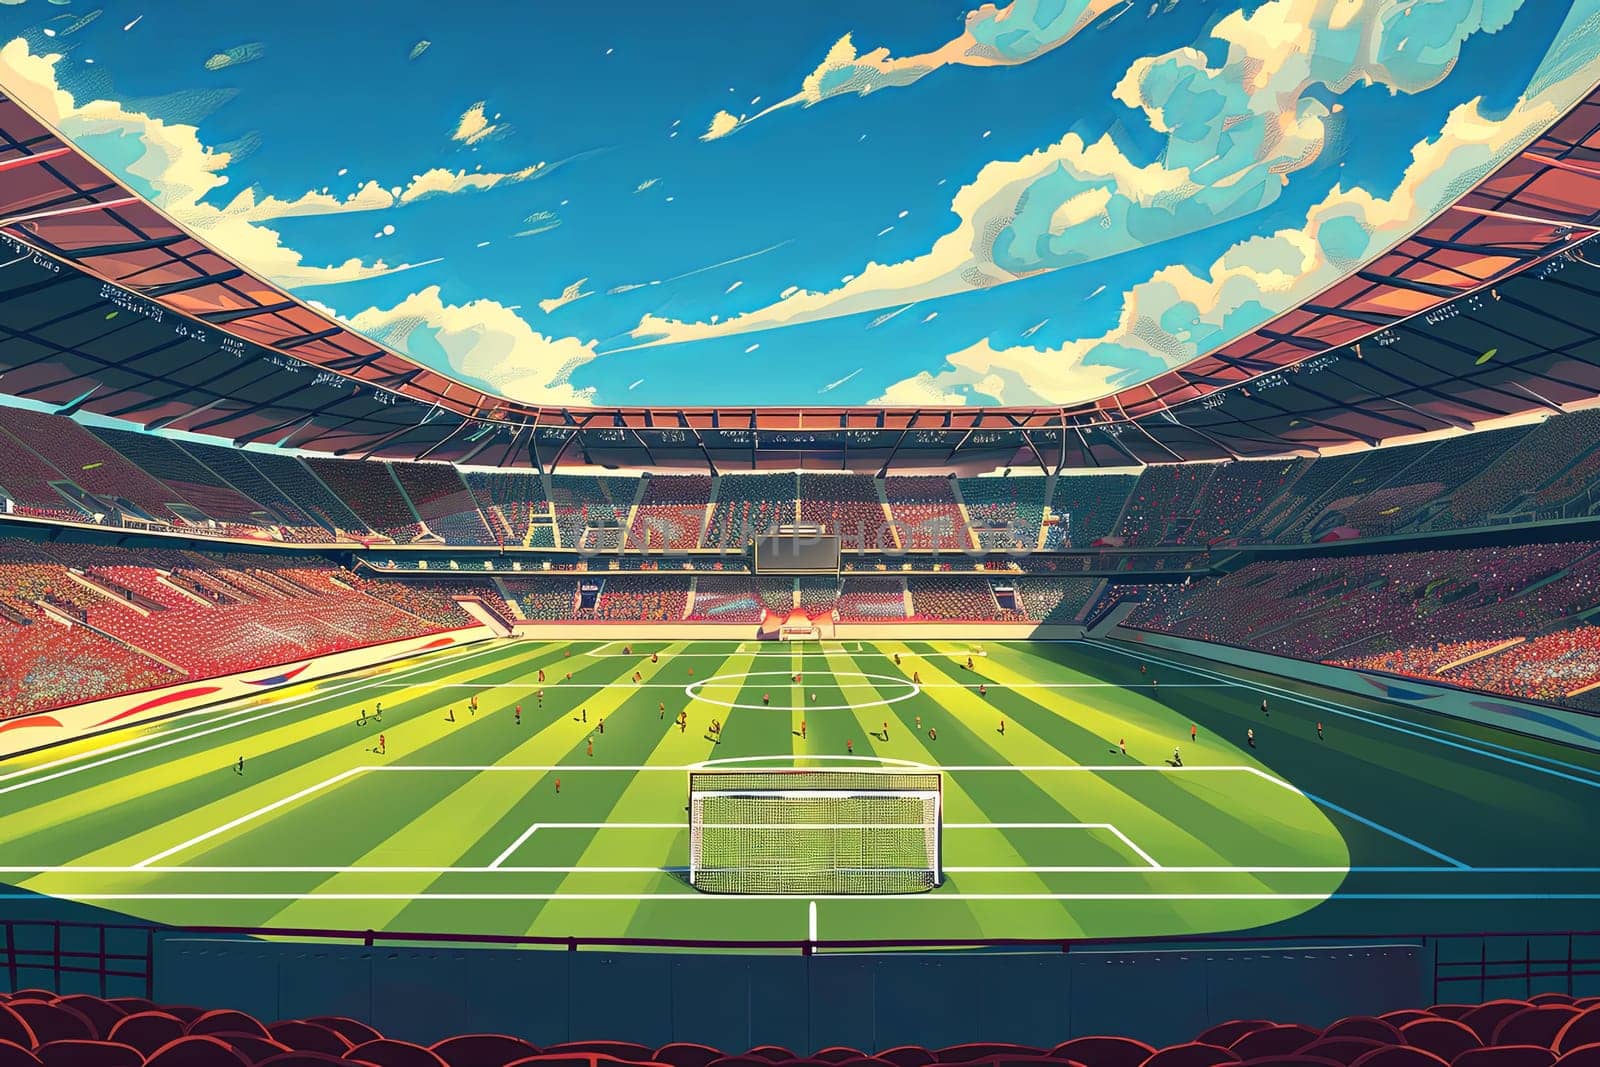 A detailed painting capturing the energy of a soccer match on a field within a stadium, with fans cheering from the stands.